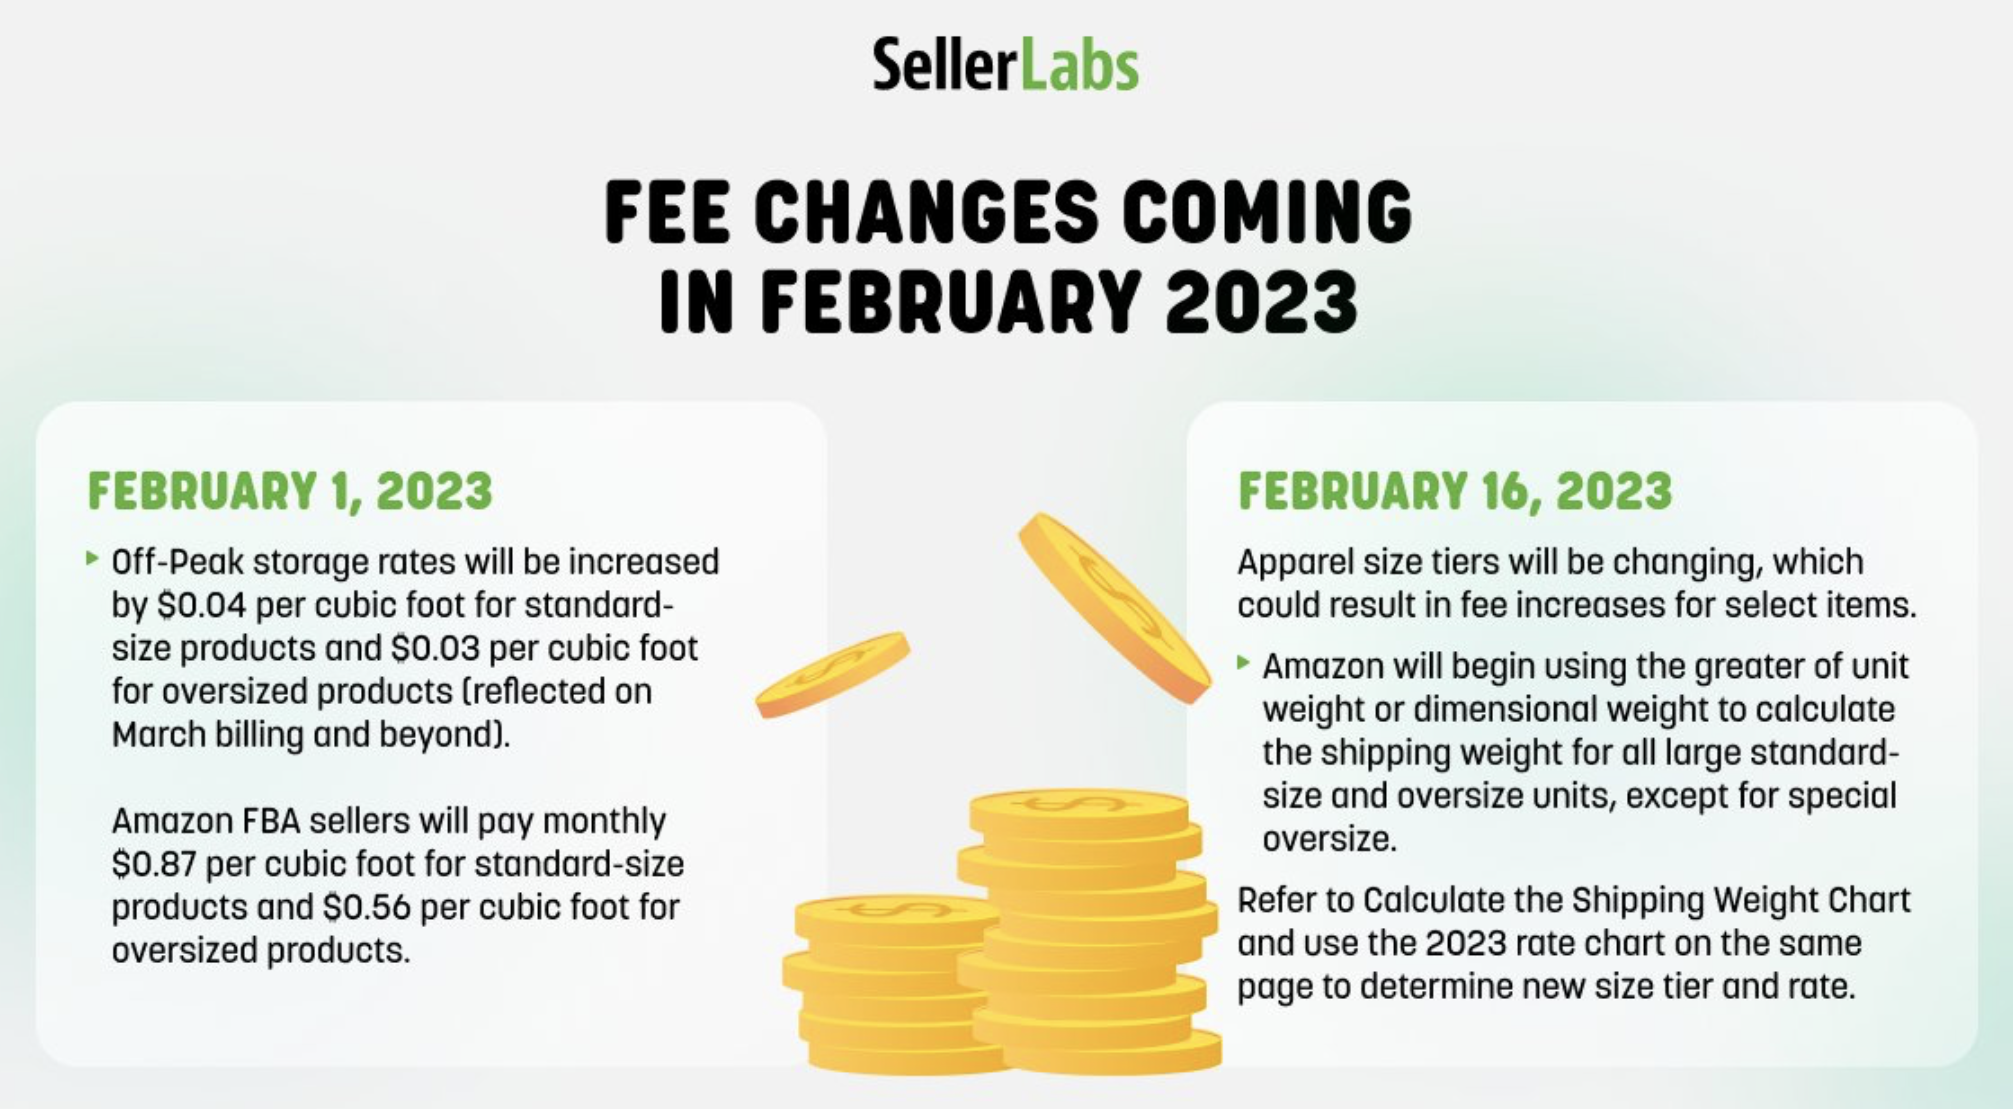 Amazon Fee Changes in February, 2023